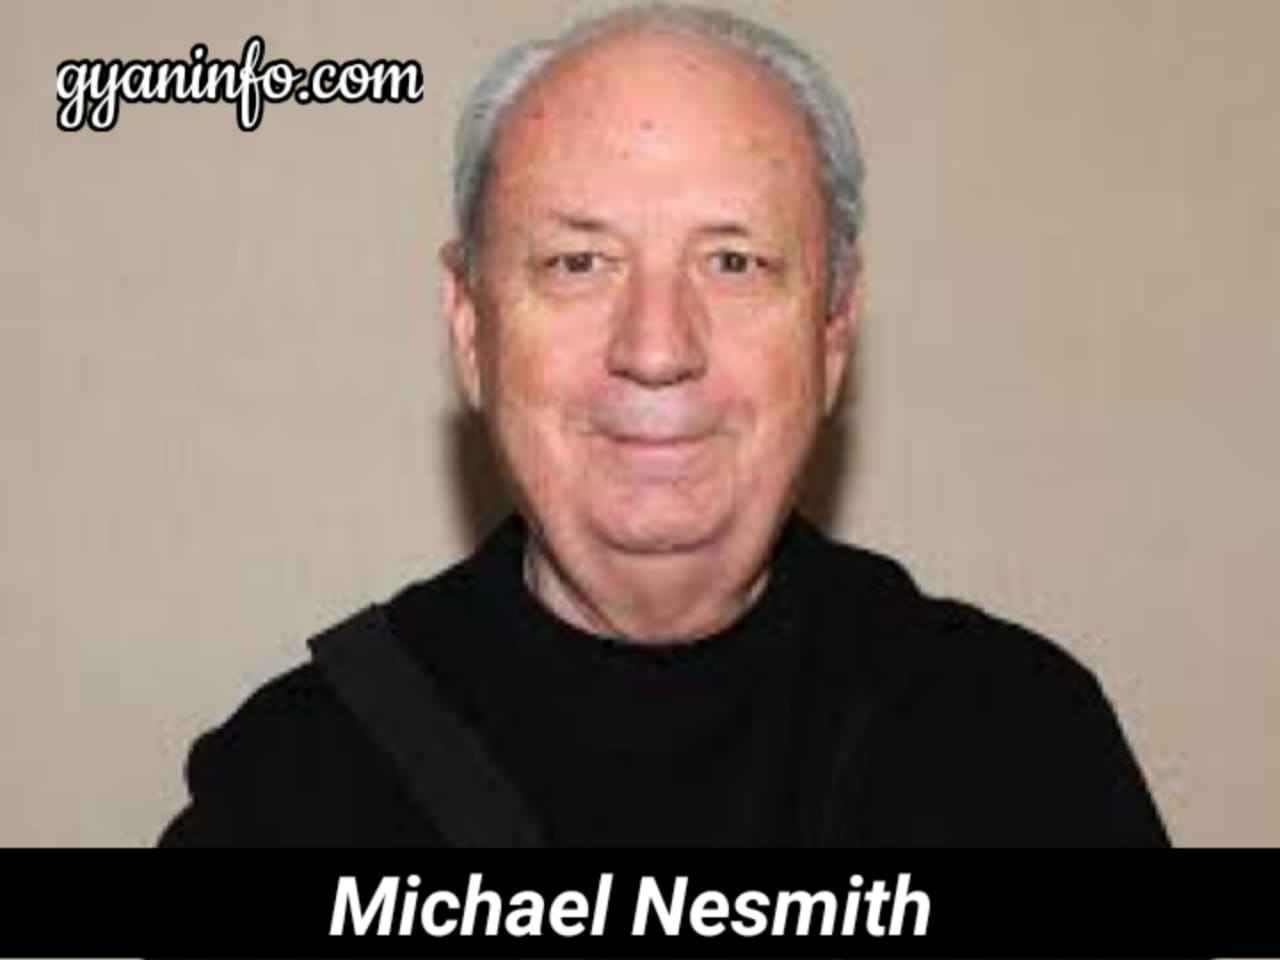 Michael Nesmith Biography, Death, Birthday, Age, Height, Wife, Net Worth & More